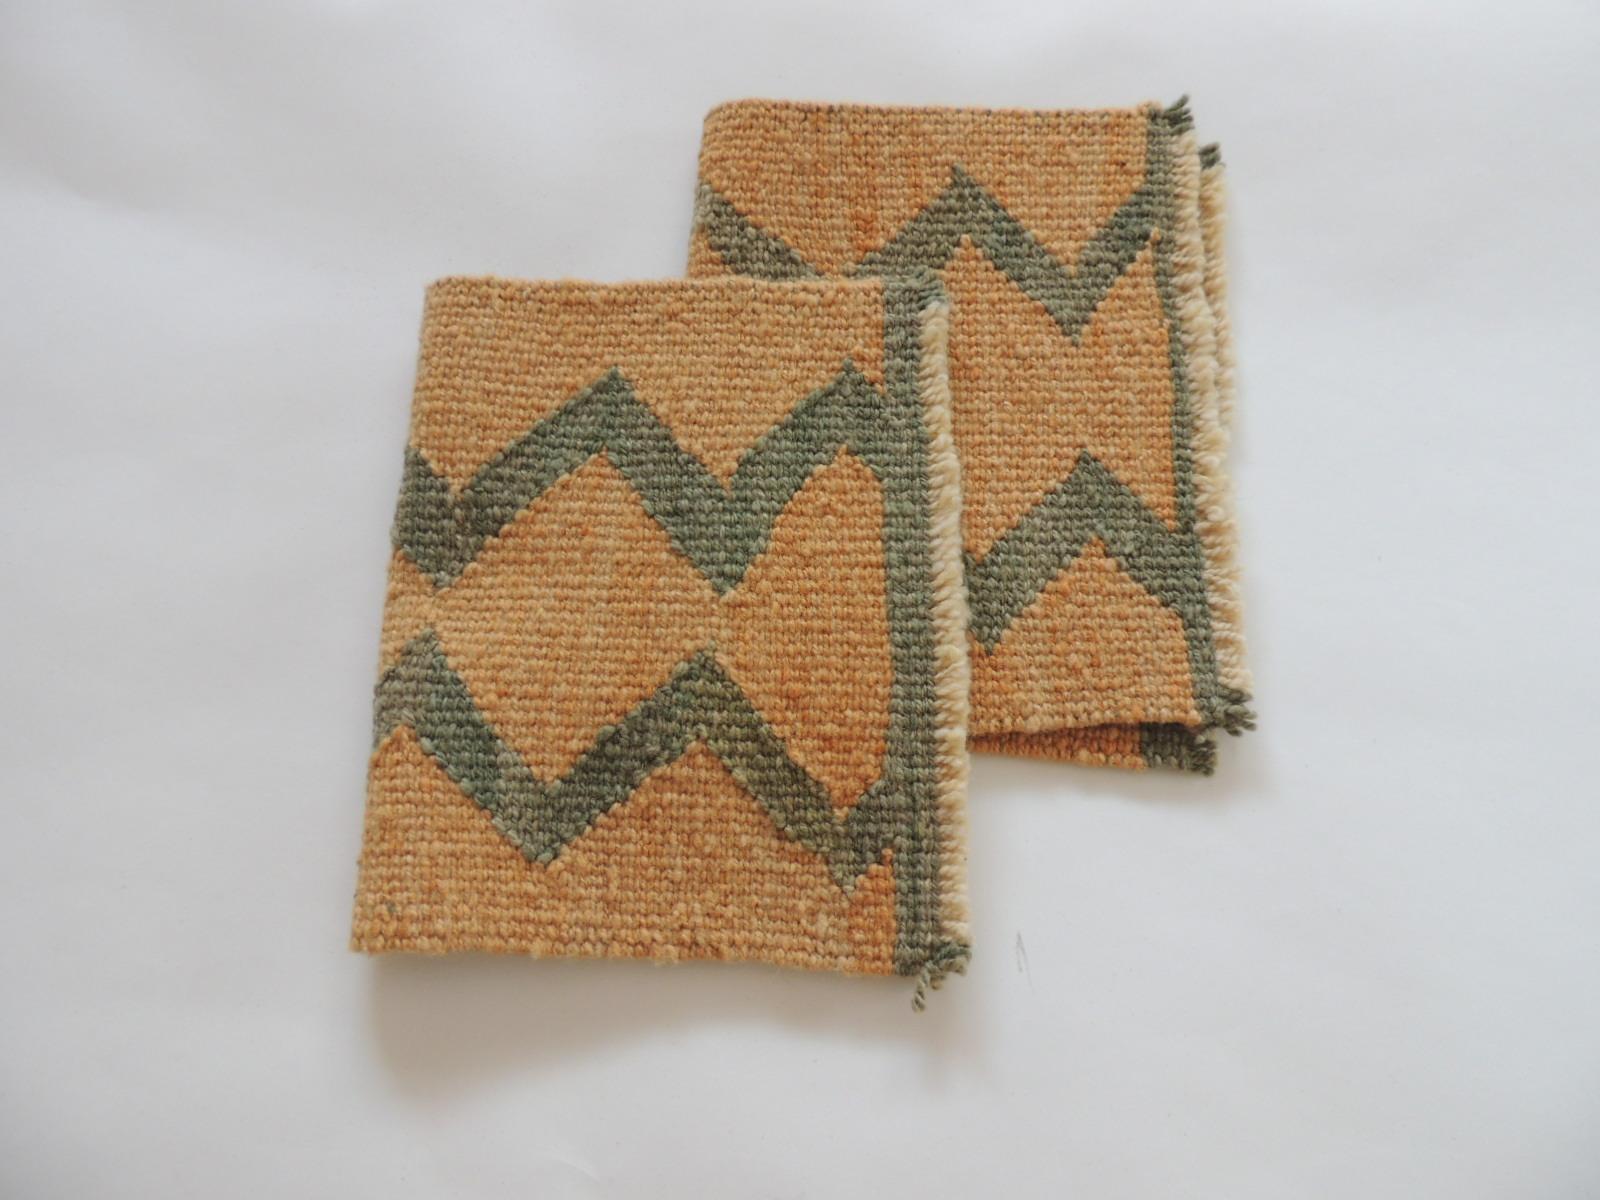 Spanish Pair of Vintage Pale Orange and Green Woven Rug Samples